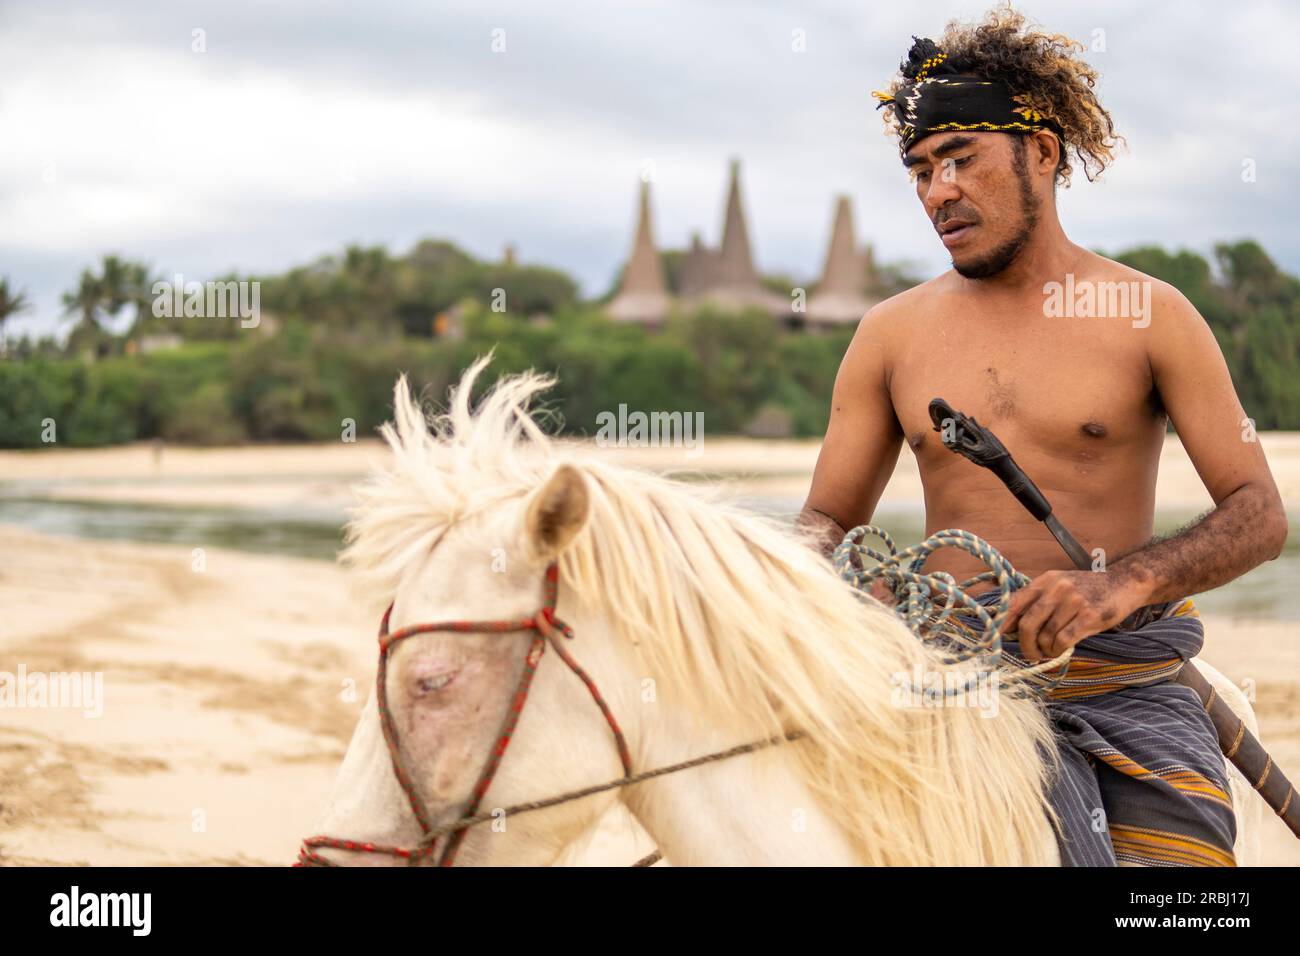 A member of the Marapu Sumba Tribe gracefully rides a horse along the shoreline, with the captivating Ratenggaro Traditional Hut in the backdrop Stock Photo